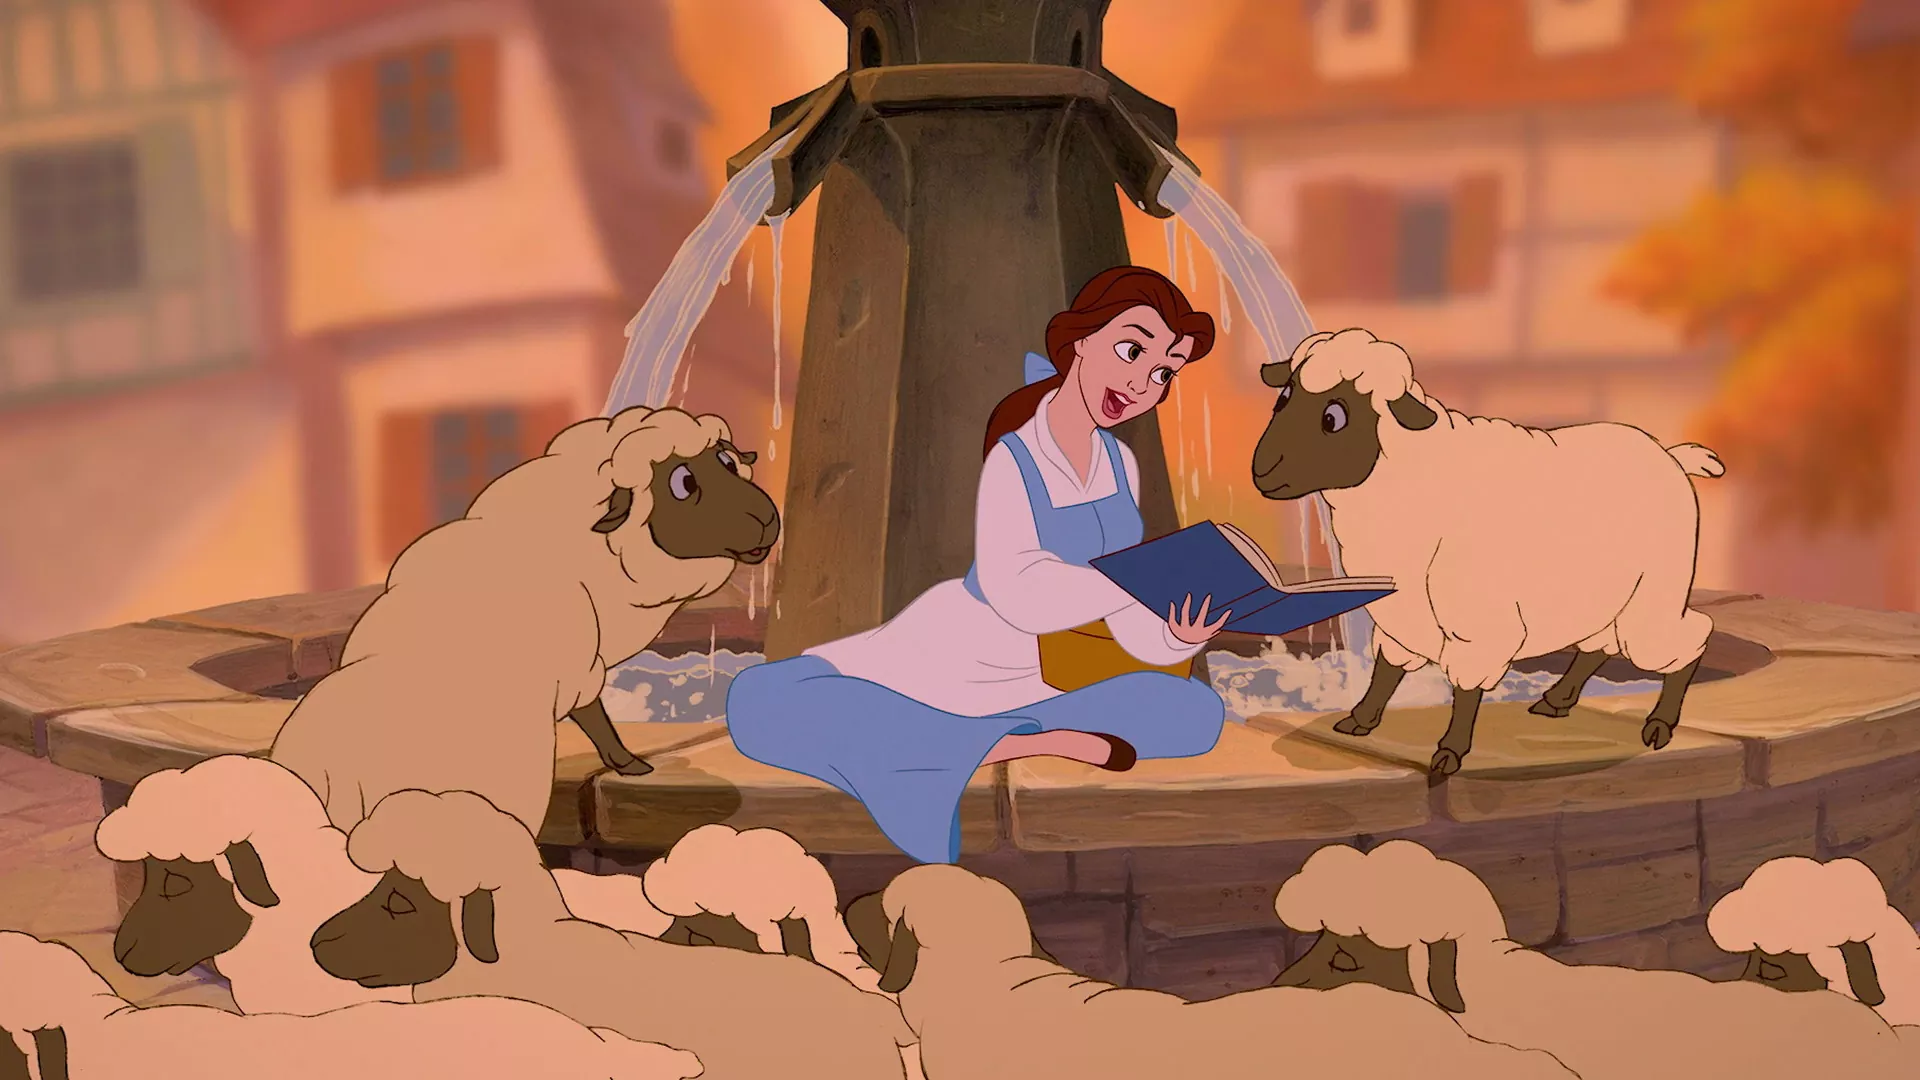 Best Disney princess: Belle - Beauty and the Beast